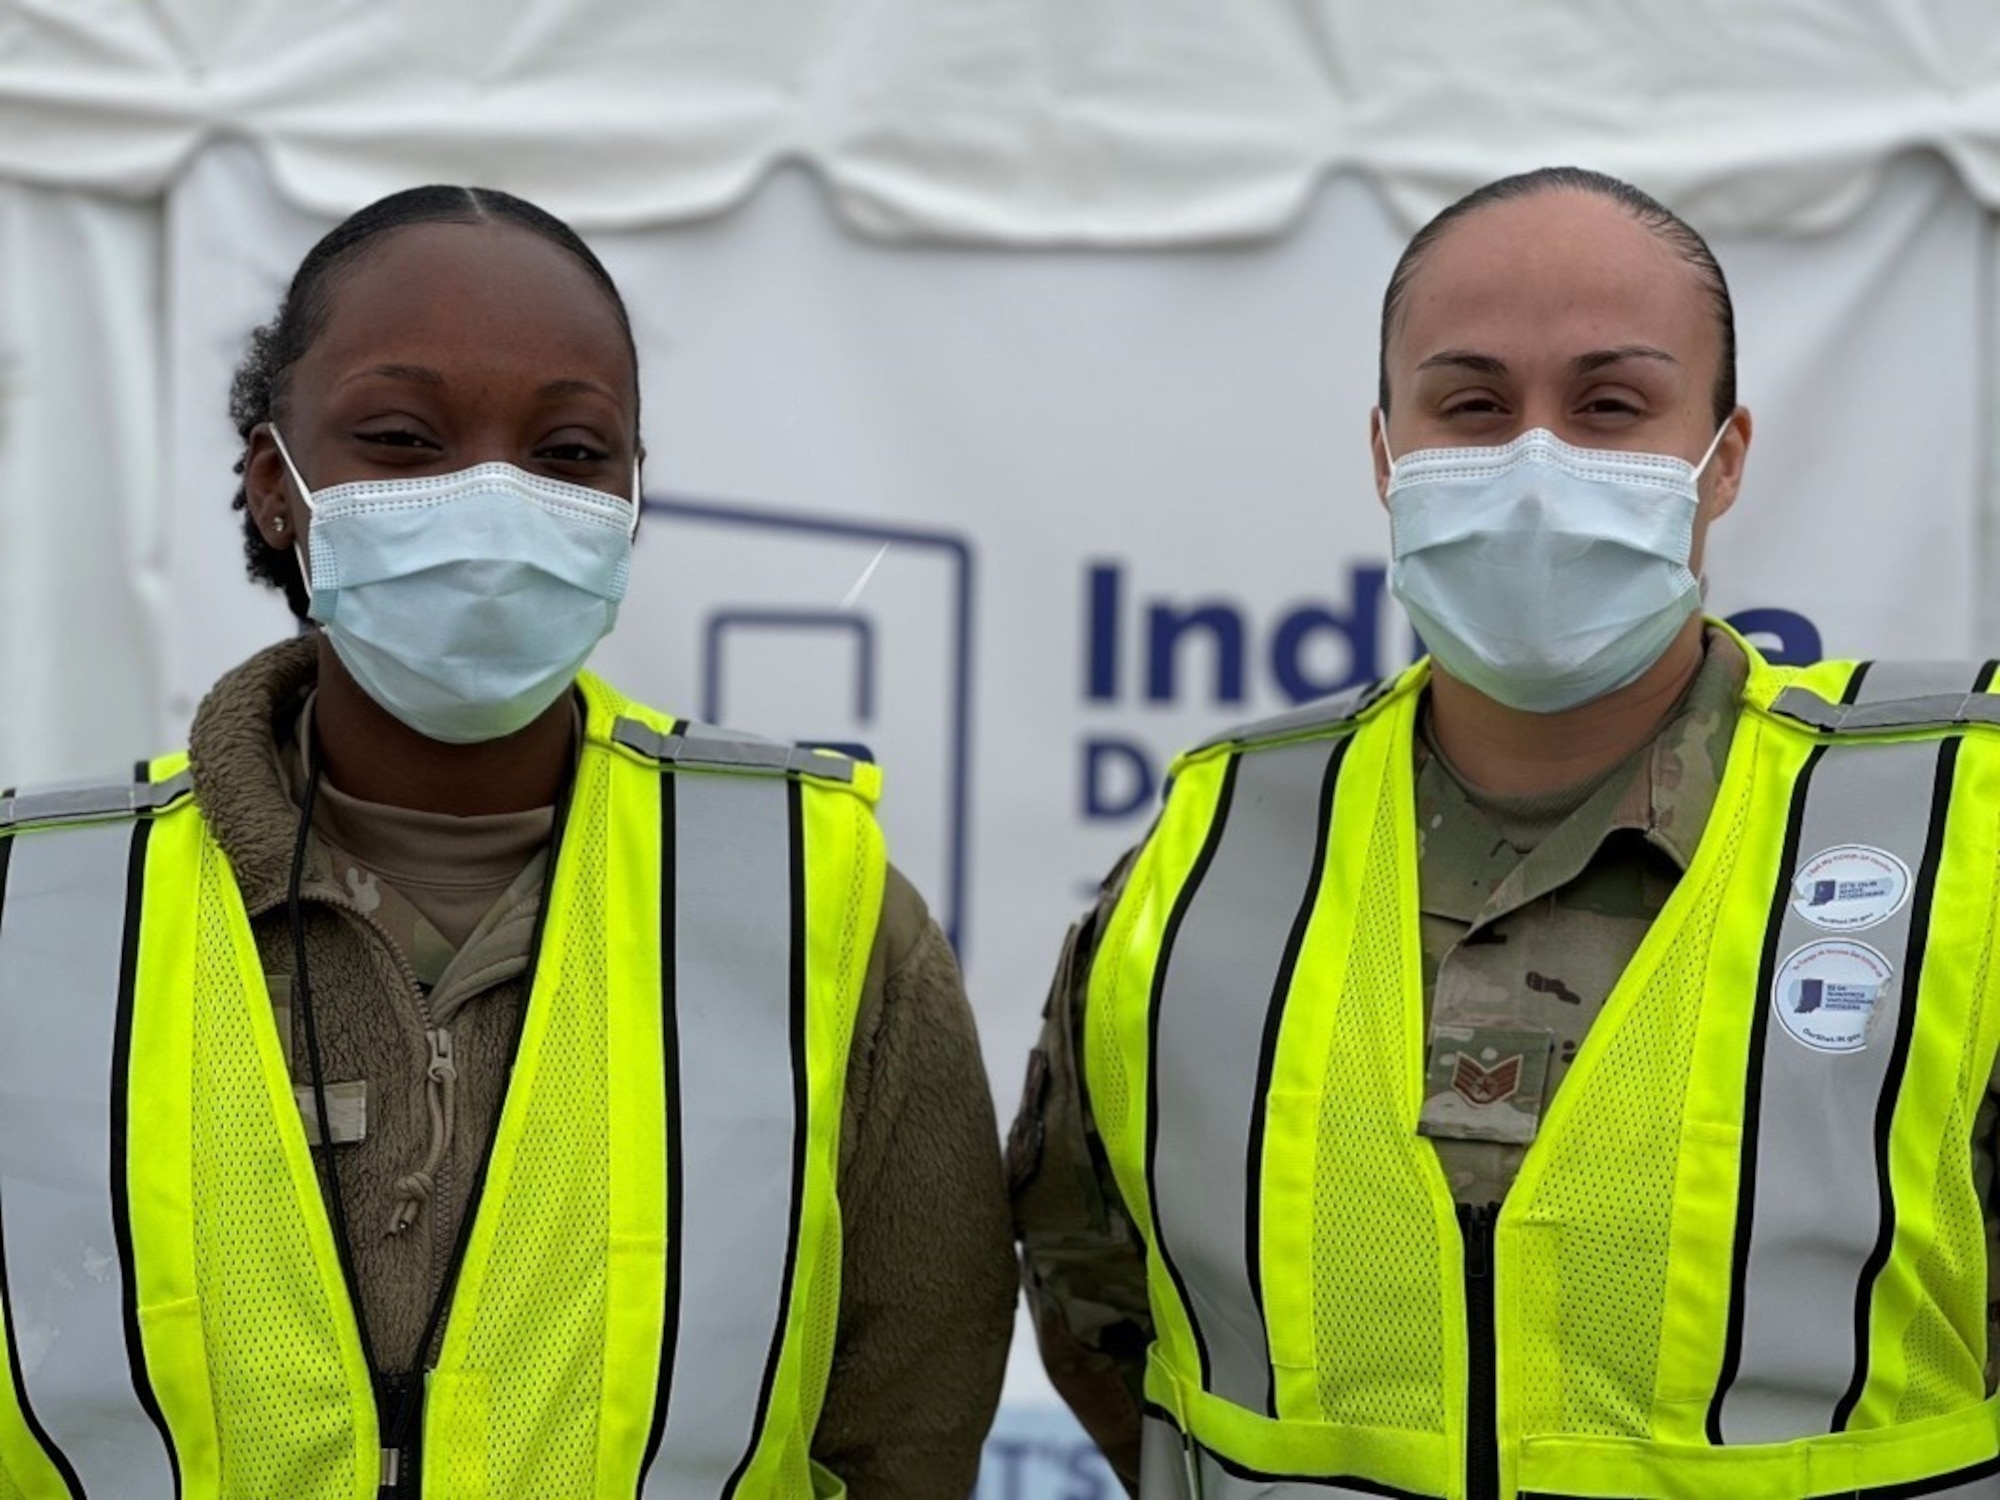 U.S. Air Force Airman First Class Taneia Thomas, left, and U.S. Air Force Staff Sgt. Saundra Turner, right, medical technicians with the 87th Medical Operations Squadron at McGuire Air Force Base, New Jersey, assigned to the 2nd Detachment, 64th Air Expeditionary Group, pose for a picture in between vaccinations at the state-led, federally supported Community Vaccination Center (CVC) at the former Roosevelt High School in Gary, Indiana, April 29, 2021.  In addition to administering vaccines, the medical professionals assigned to the CVC monitor the care of all patients, before and after each shot, in order to maintain site safety and respond to any adverse or situation. The CVC supports both drive-up and walk-in appointments and will vaccinate up to 3,000 local community members a day. U.S. Northern Command, through U.S. Army North, remains committed to providing continued, flexible Department of Defense support to the Federal Emergency Management Agency as part of the whole-of-government response to COVID-19. (U.S. Air Force photo by 2Lt Brittney Sturgis, 64th Air Expeditionary Group, 2nd Detachment.)